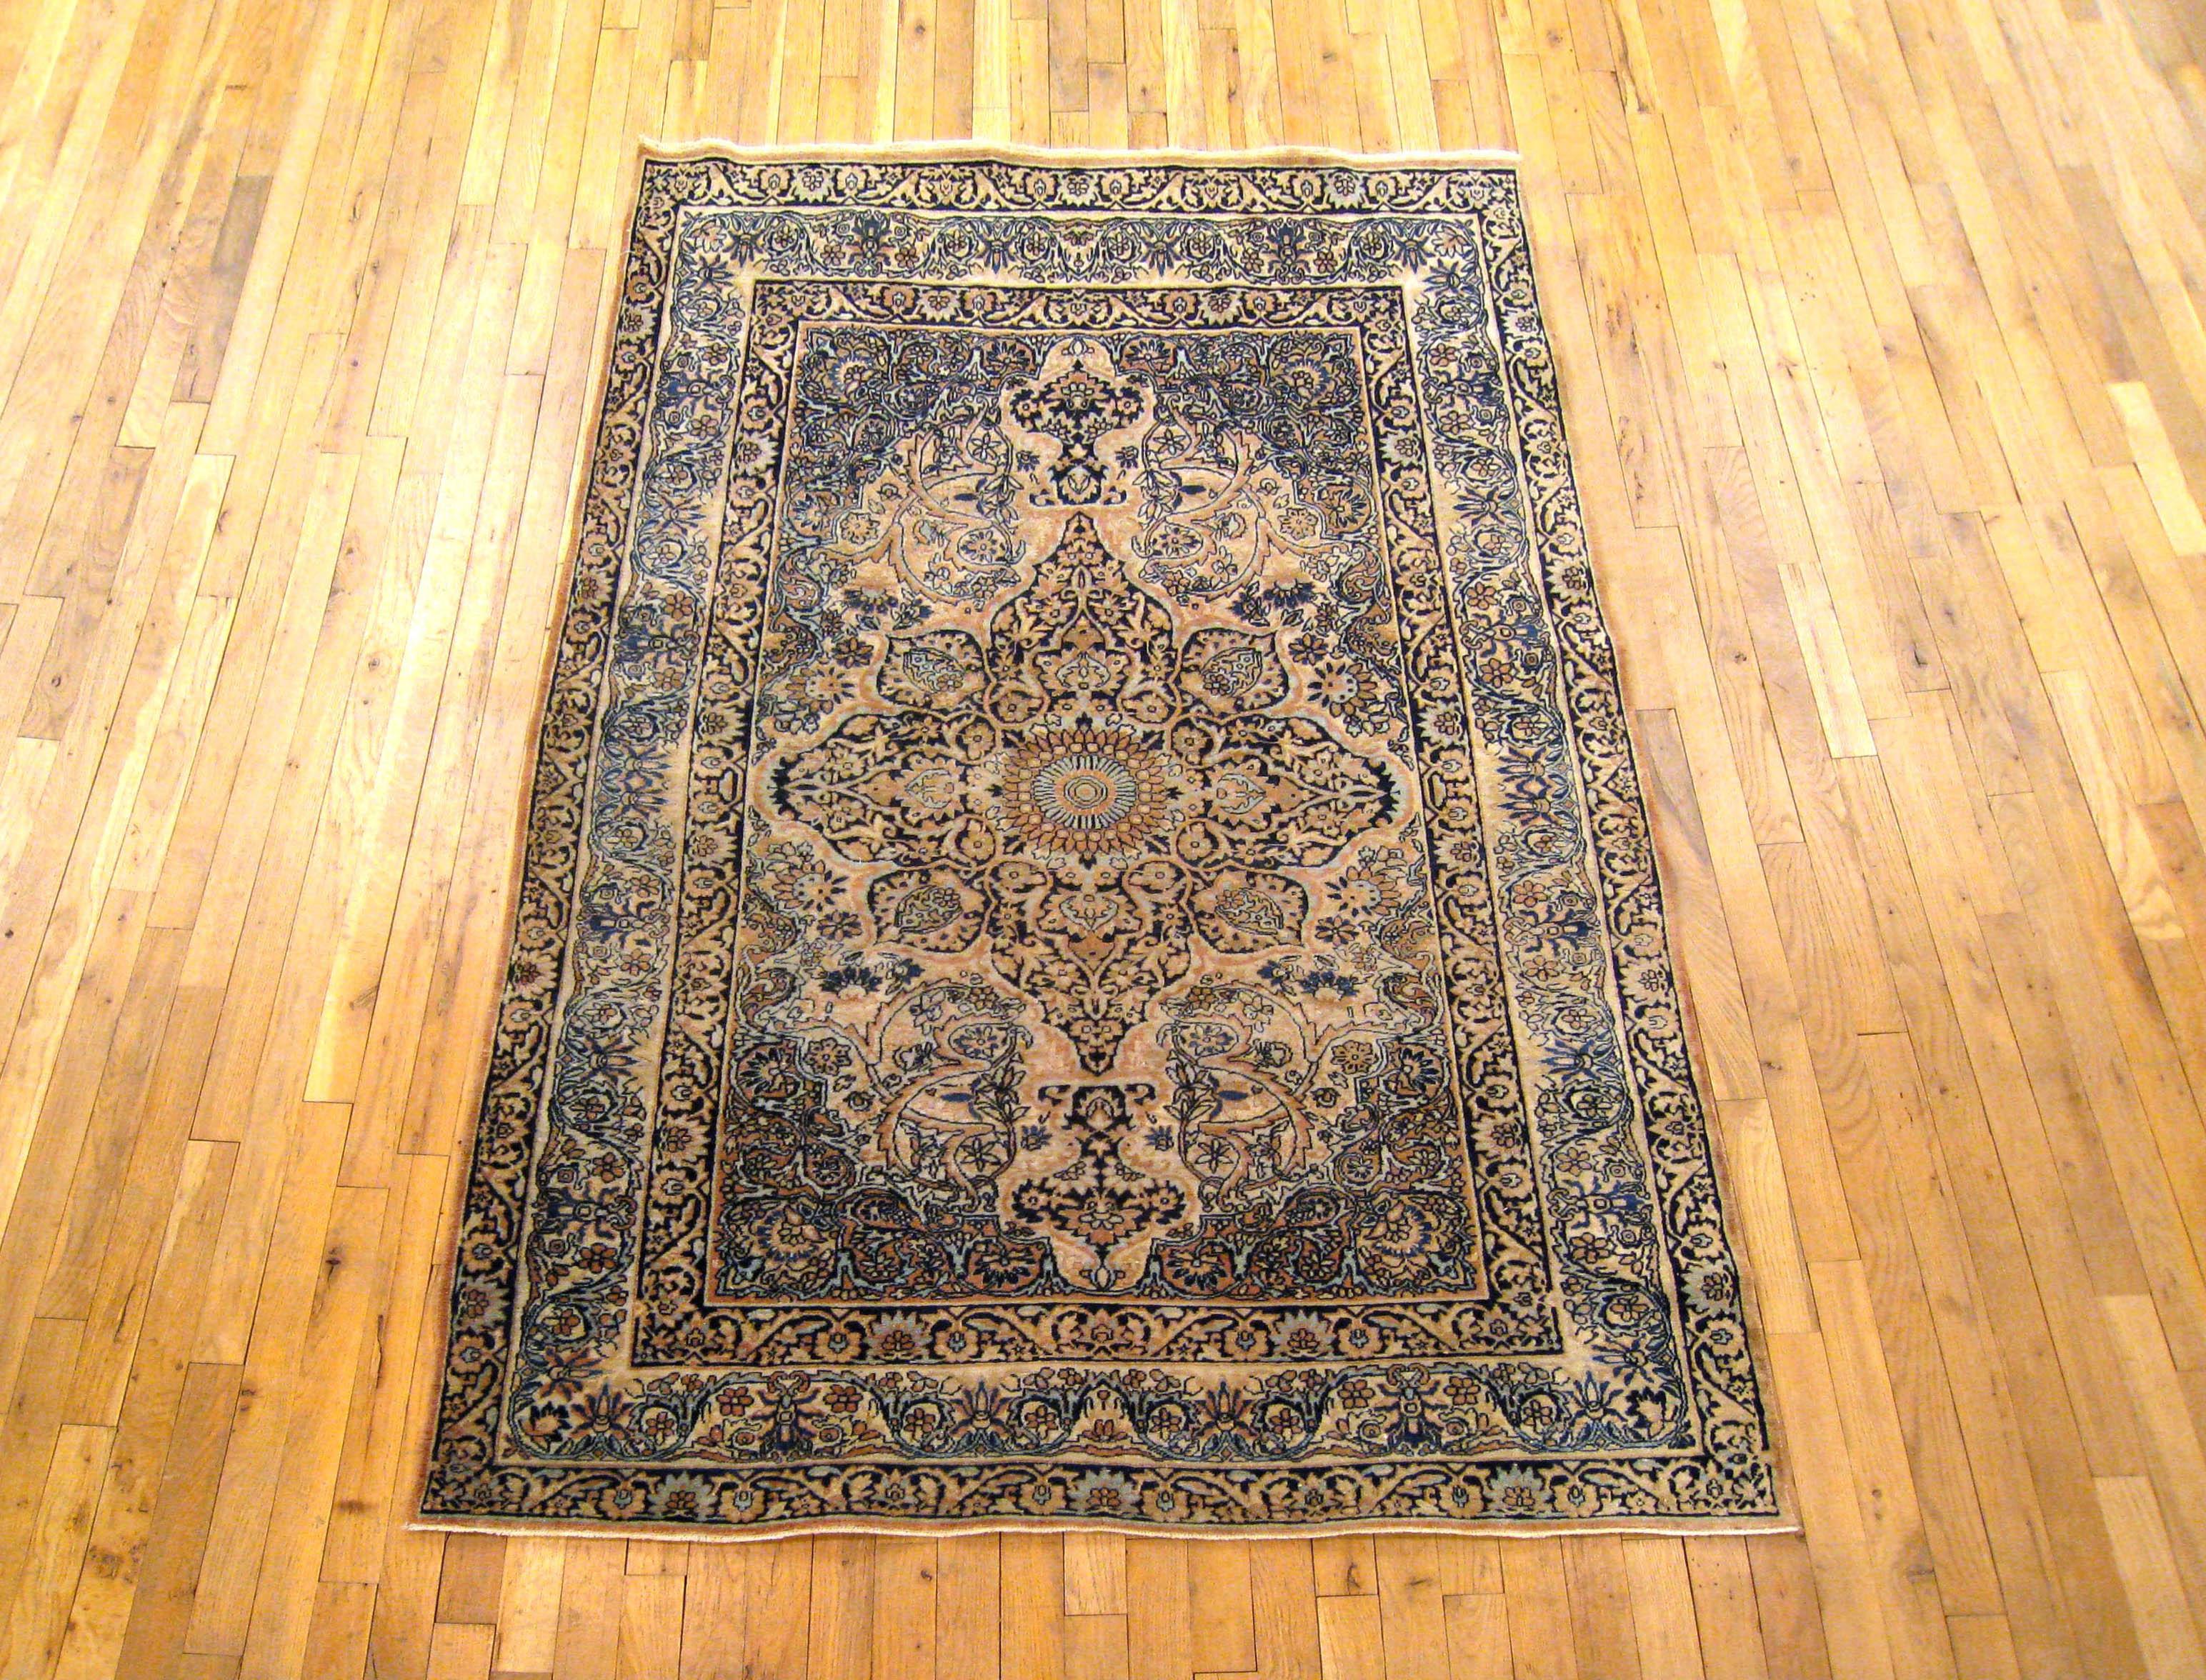 An antique Persian Lavar rug, size 6'5 H x 4'4 W, circa 1900. This fine hand-knotted oriental rug features a beautiful central medallion, encompassed by floral reserves in each corner. The primary border and guard borders reiterate and expand upon